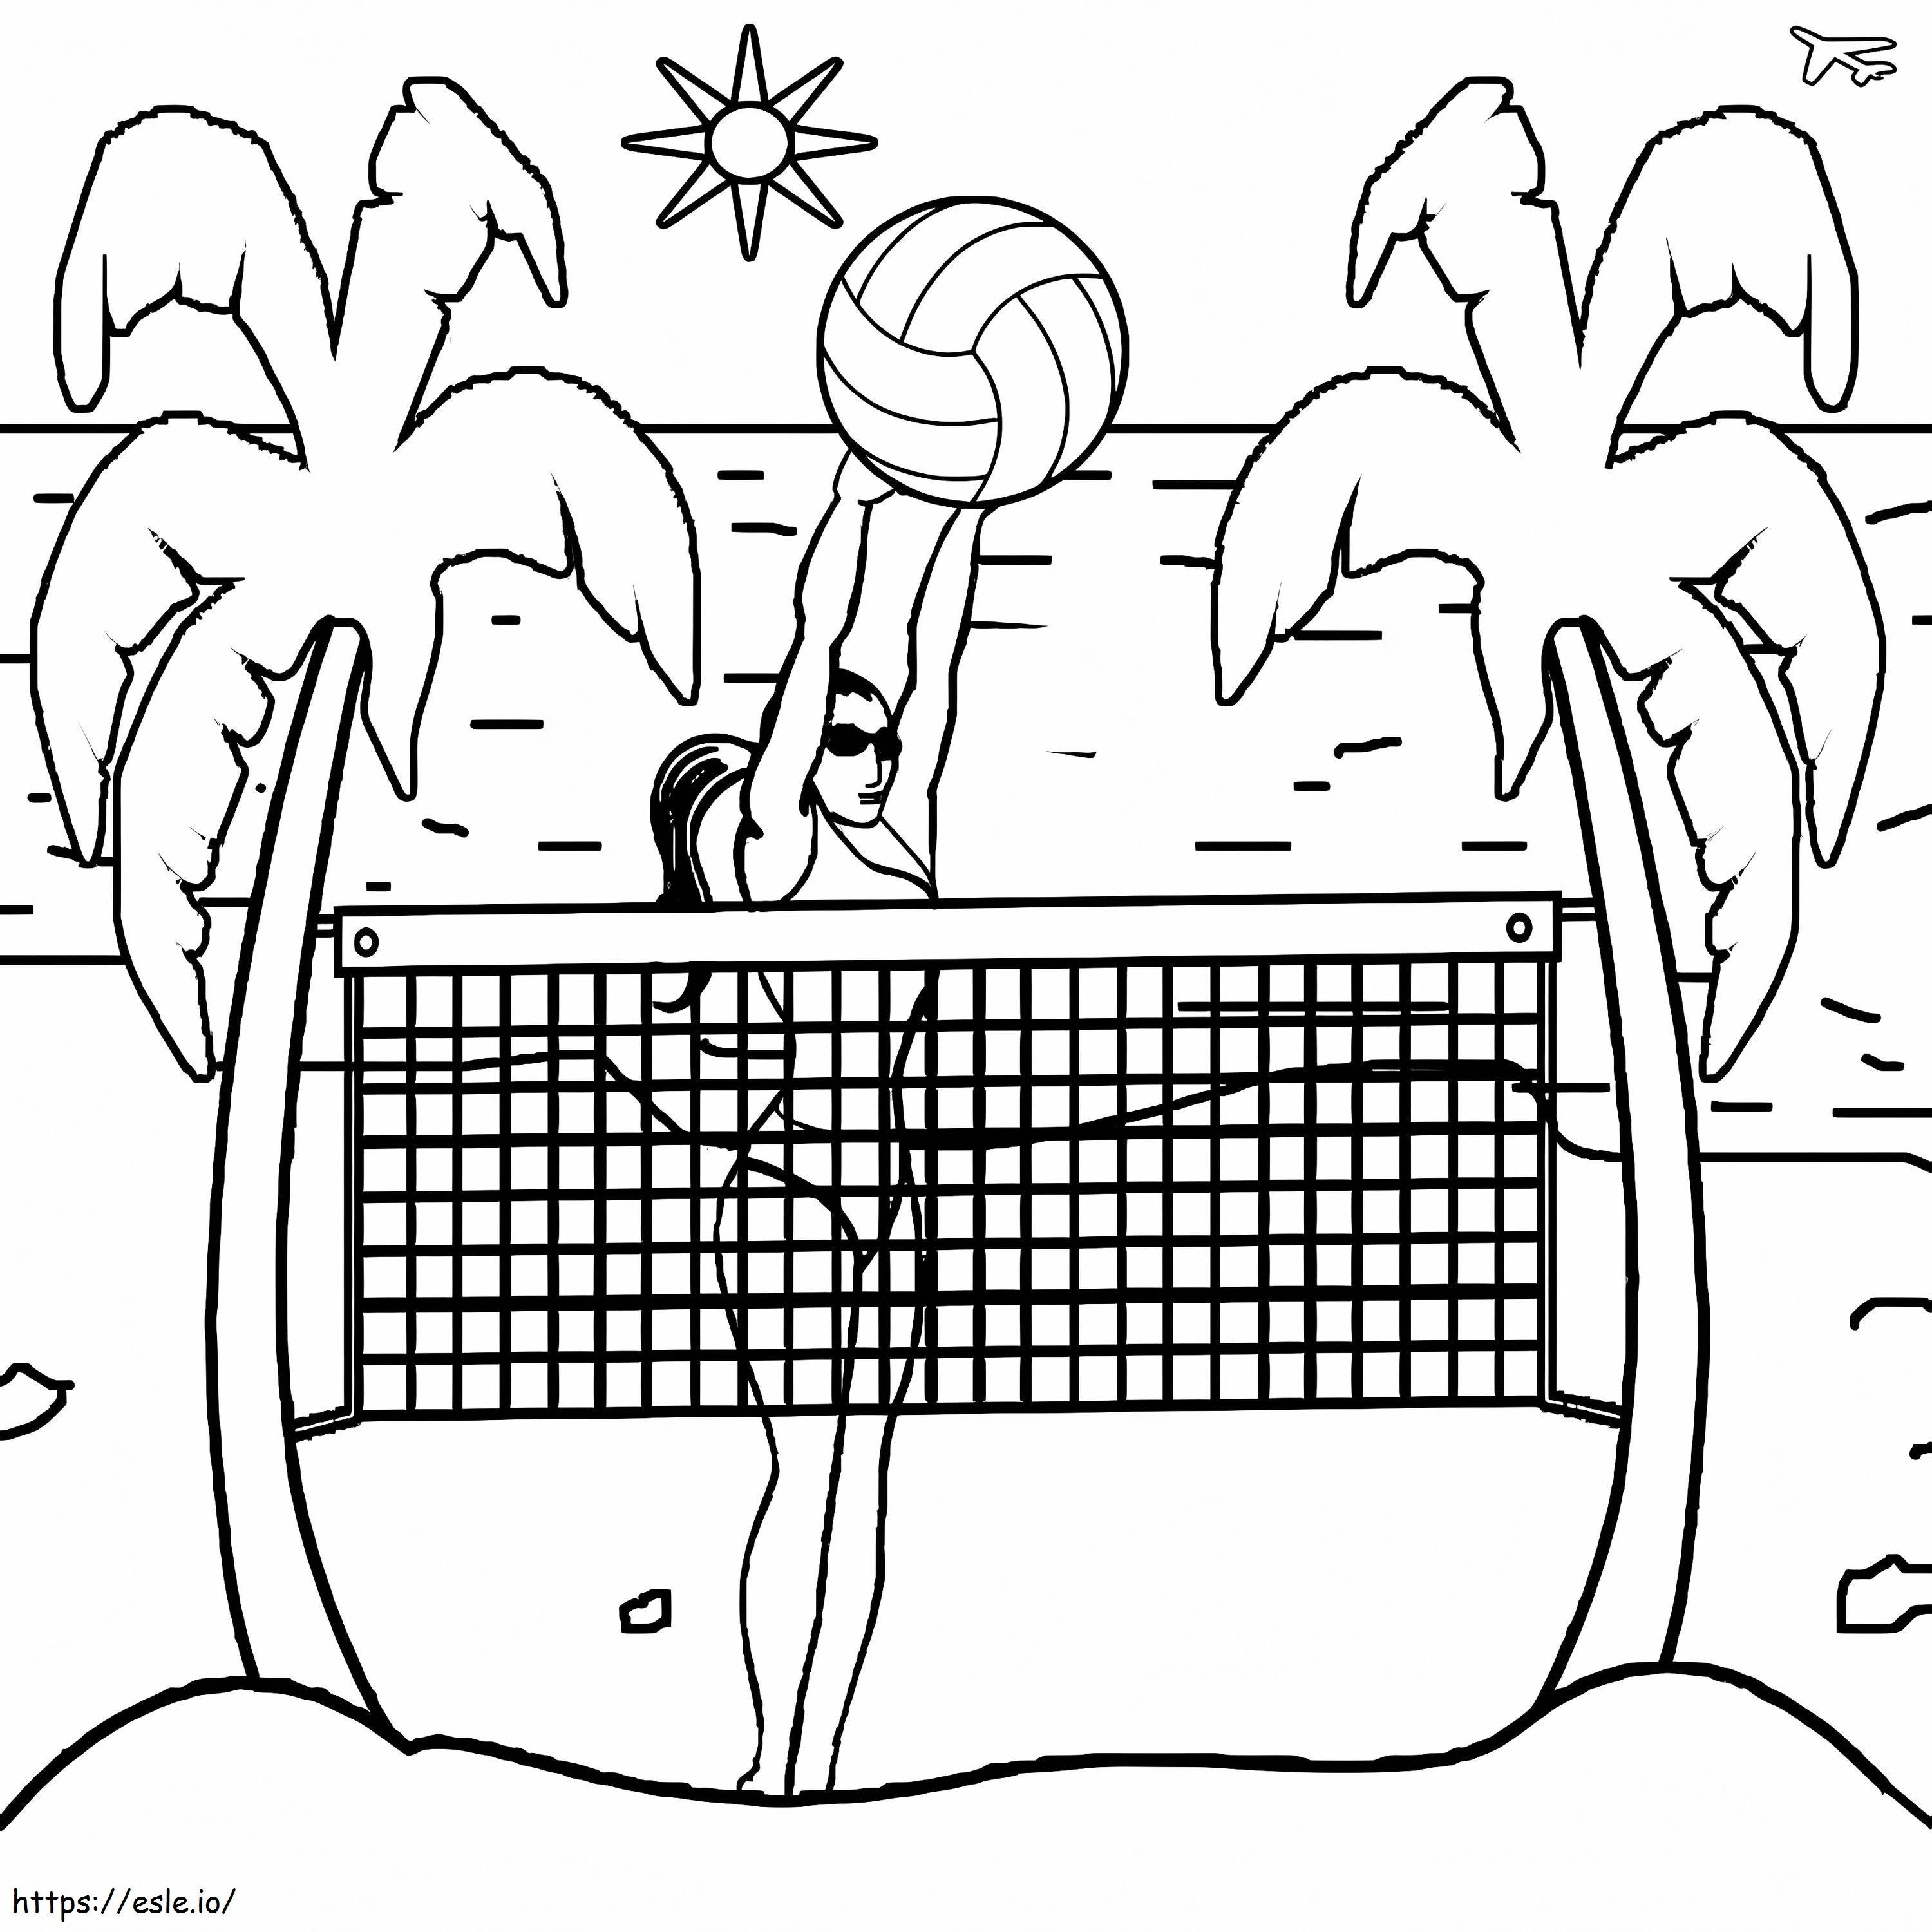 Beach Volleyball coloring page